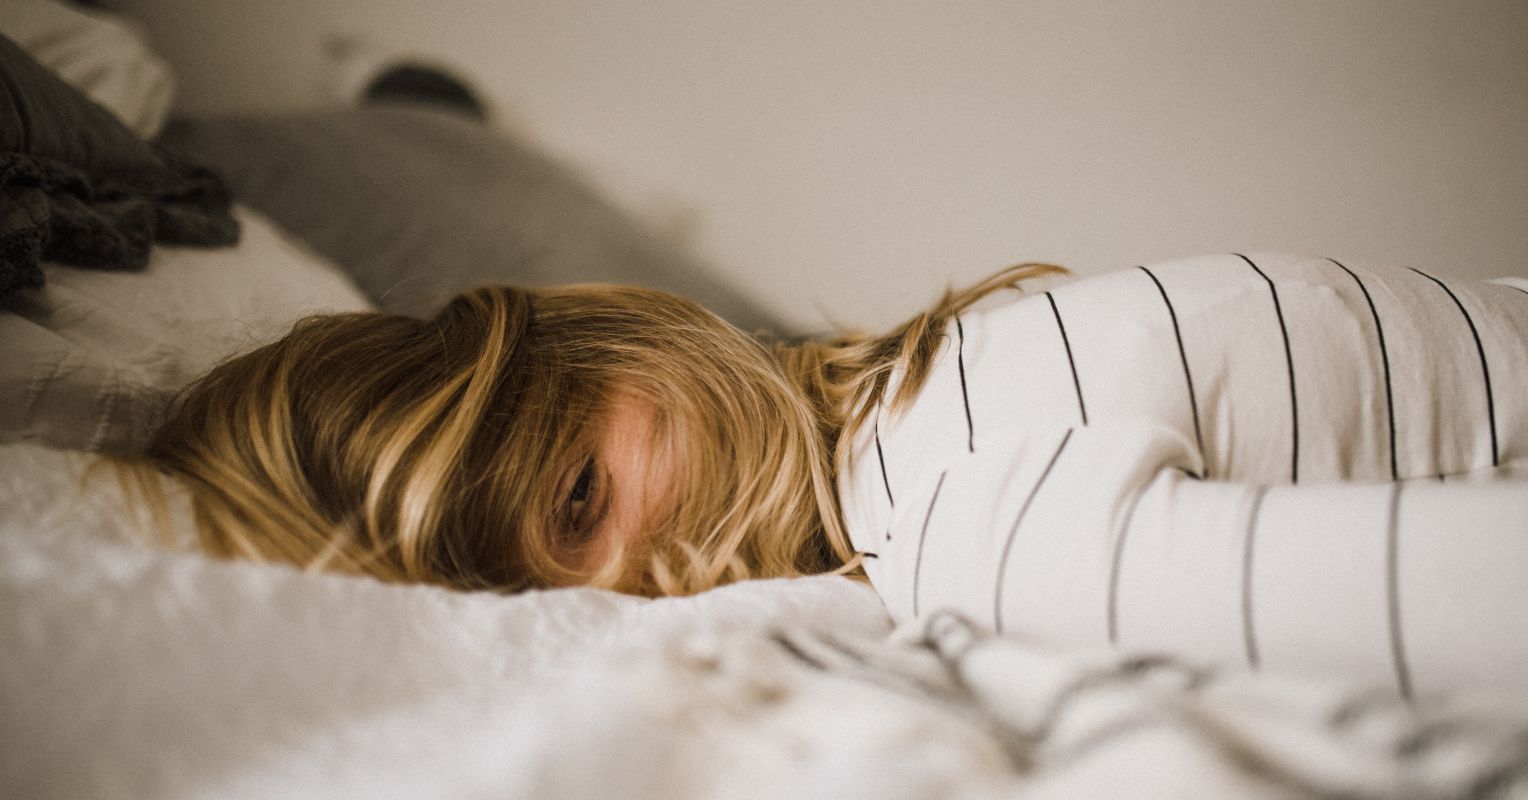 Your Sleep Position Affects Much More Than You Think